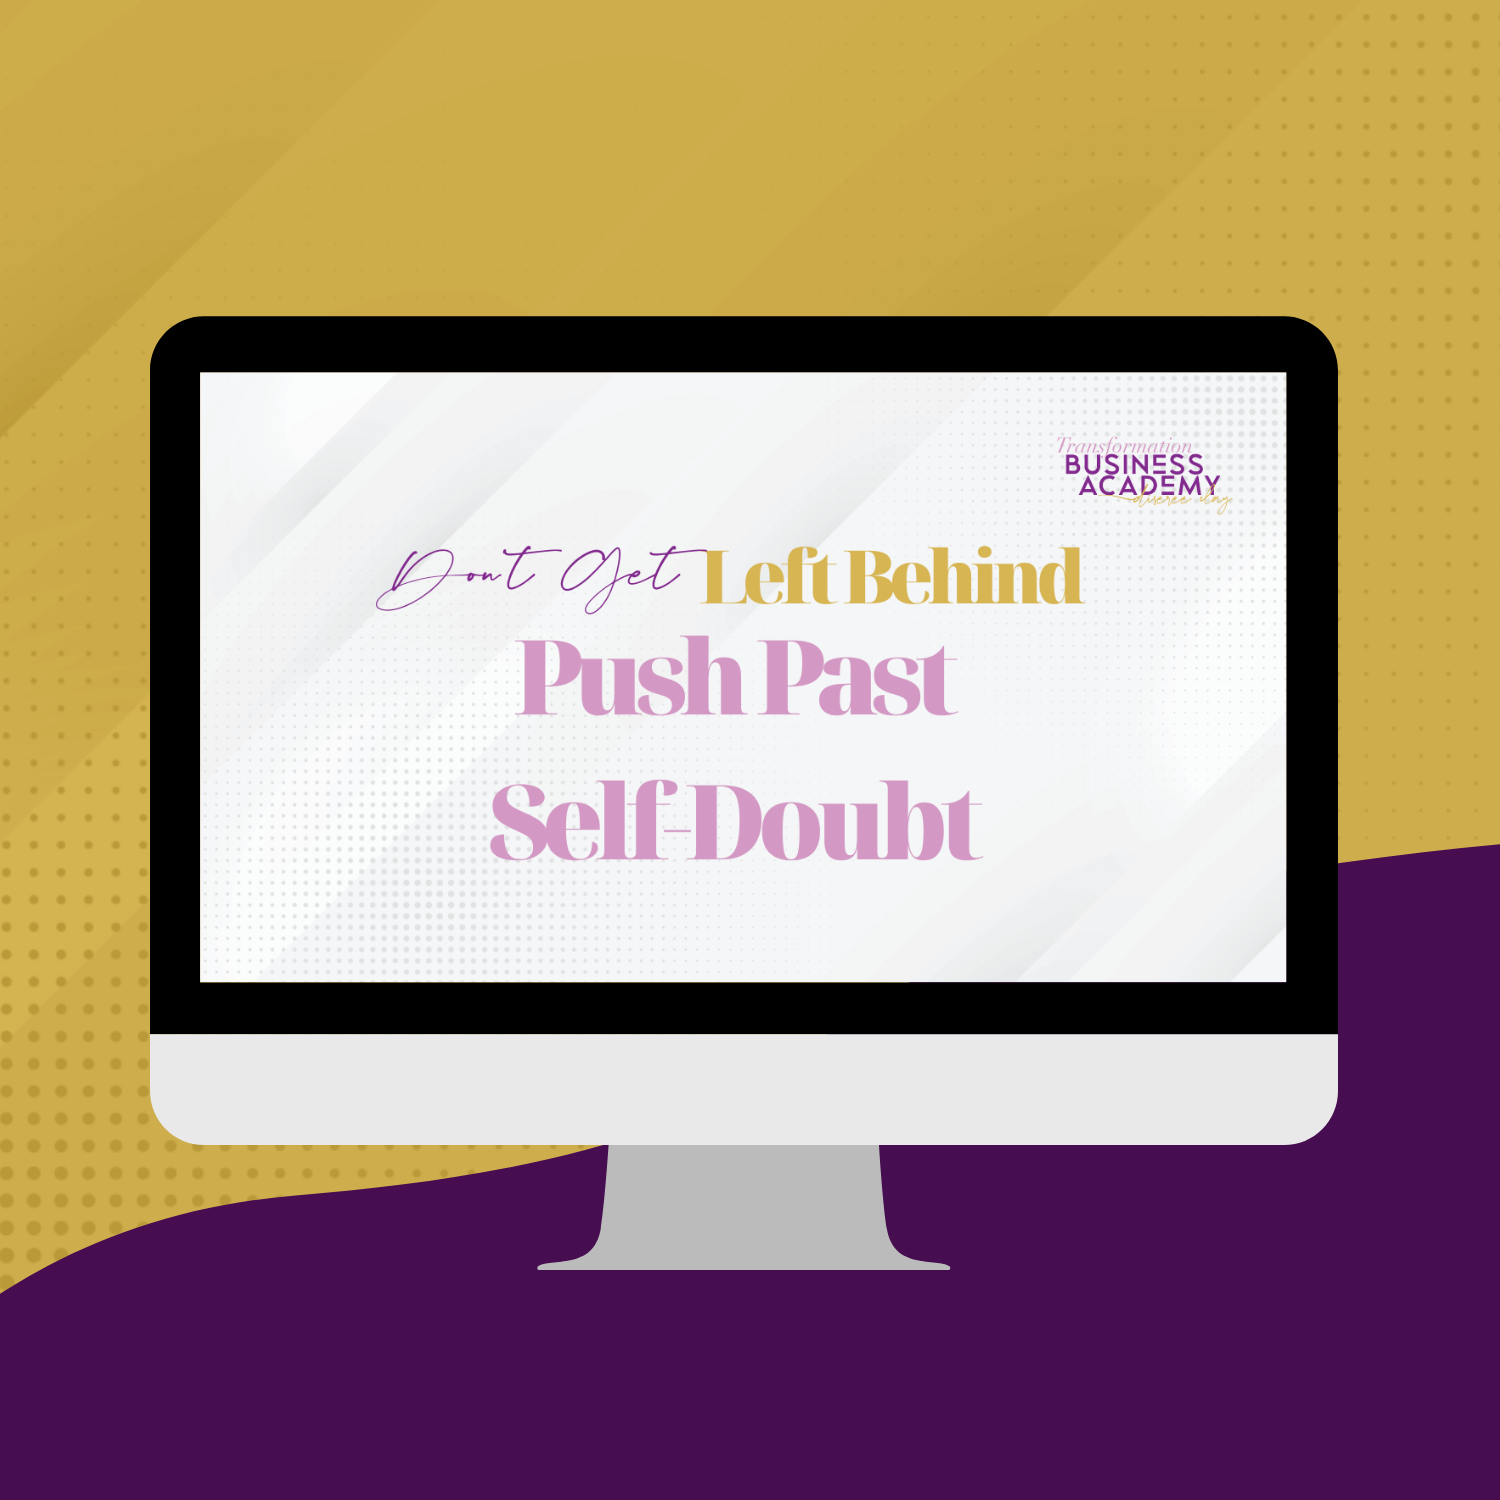 Don’t Get Left Behind: Push Past Self Doubt